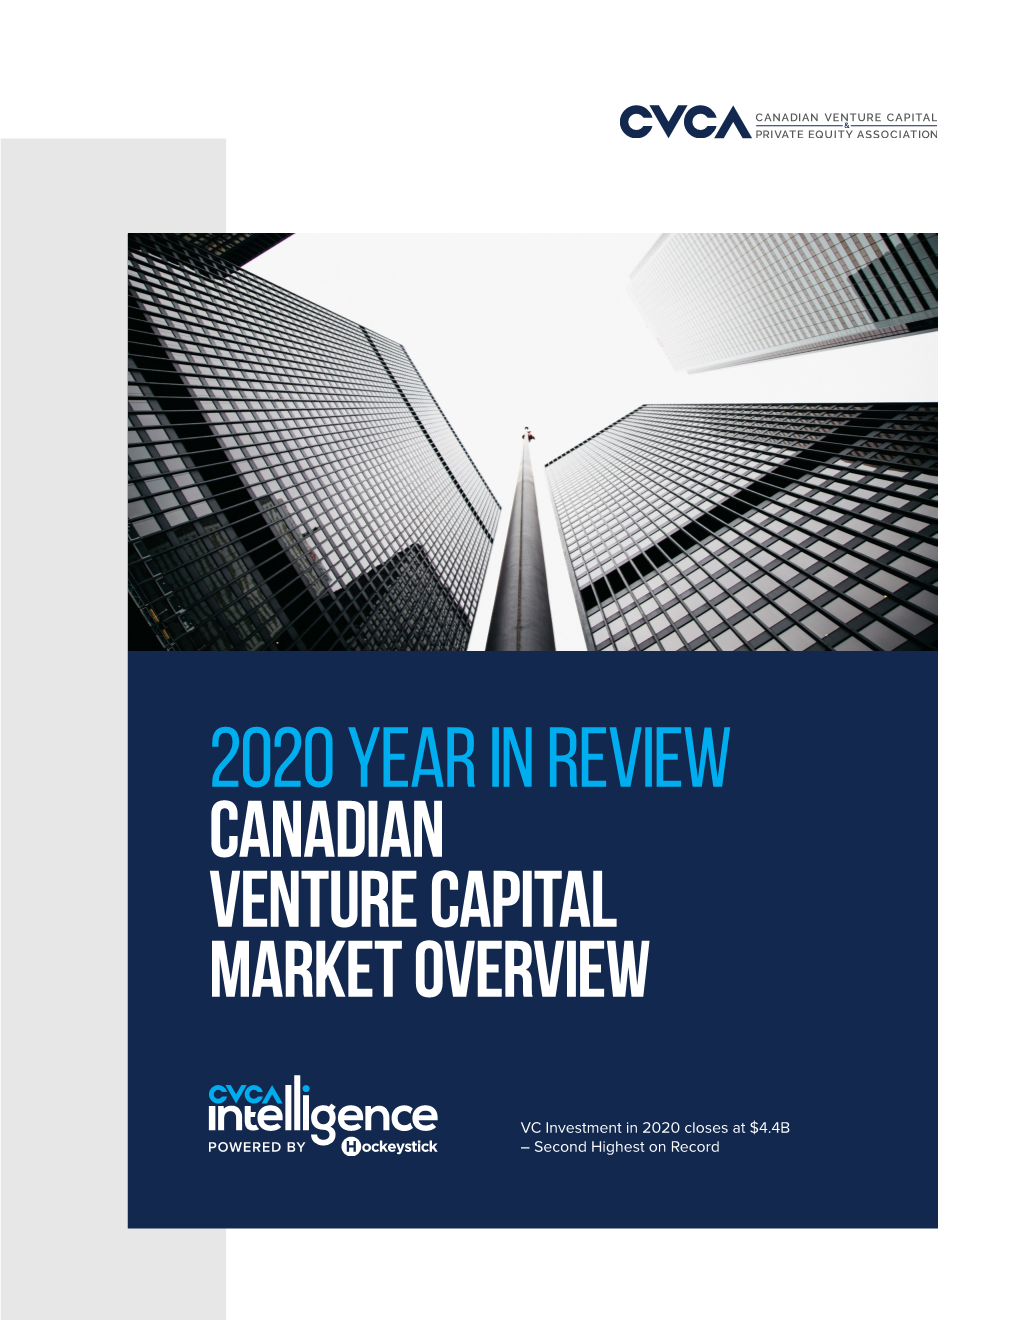 2020 Year in Review Canadian Venture Capital Market Overview